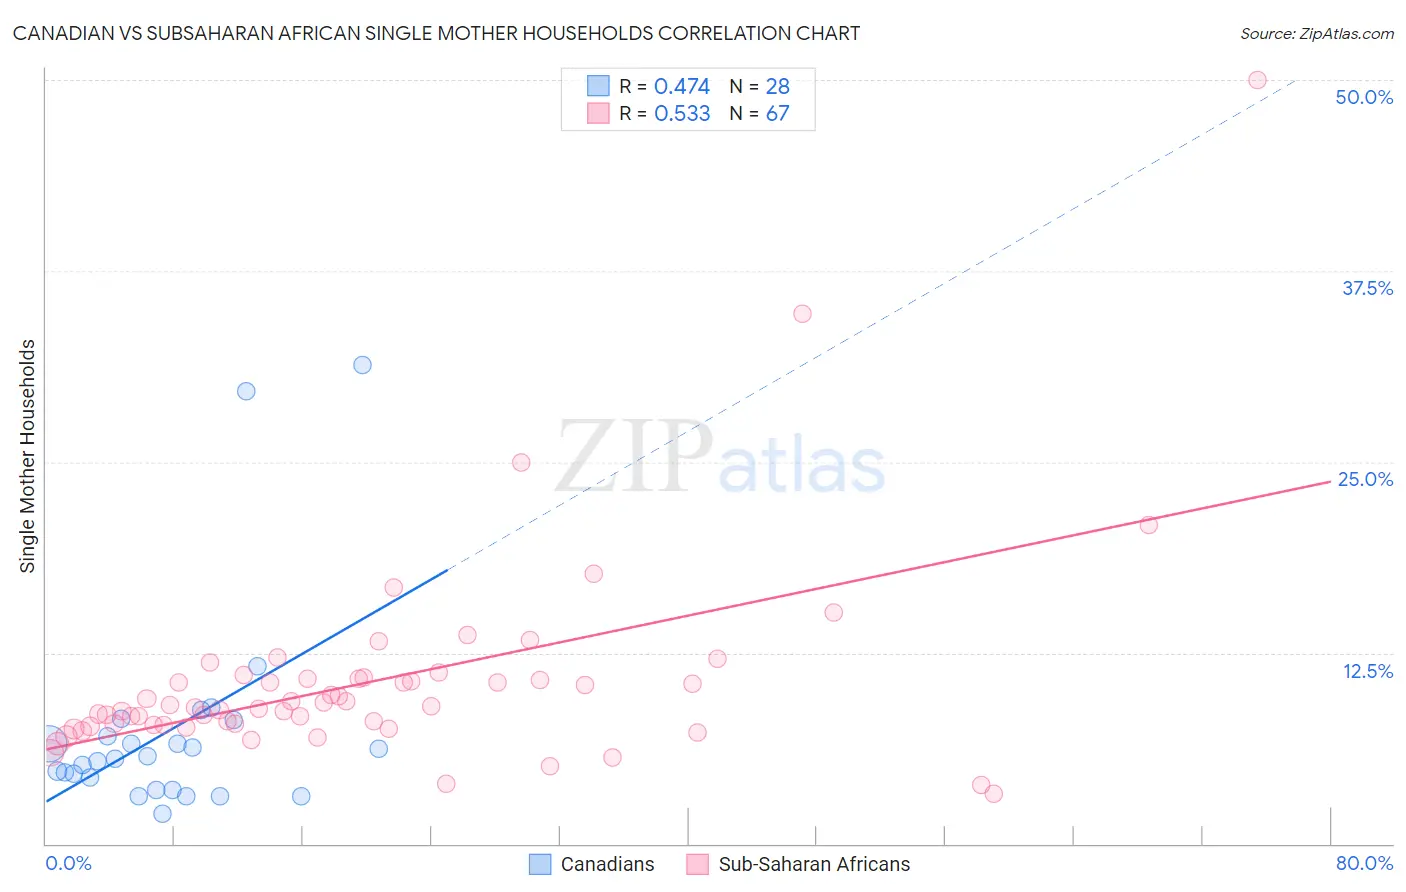 Canadian vs Subsaharan African Single Mother Households